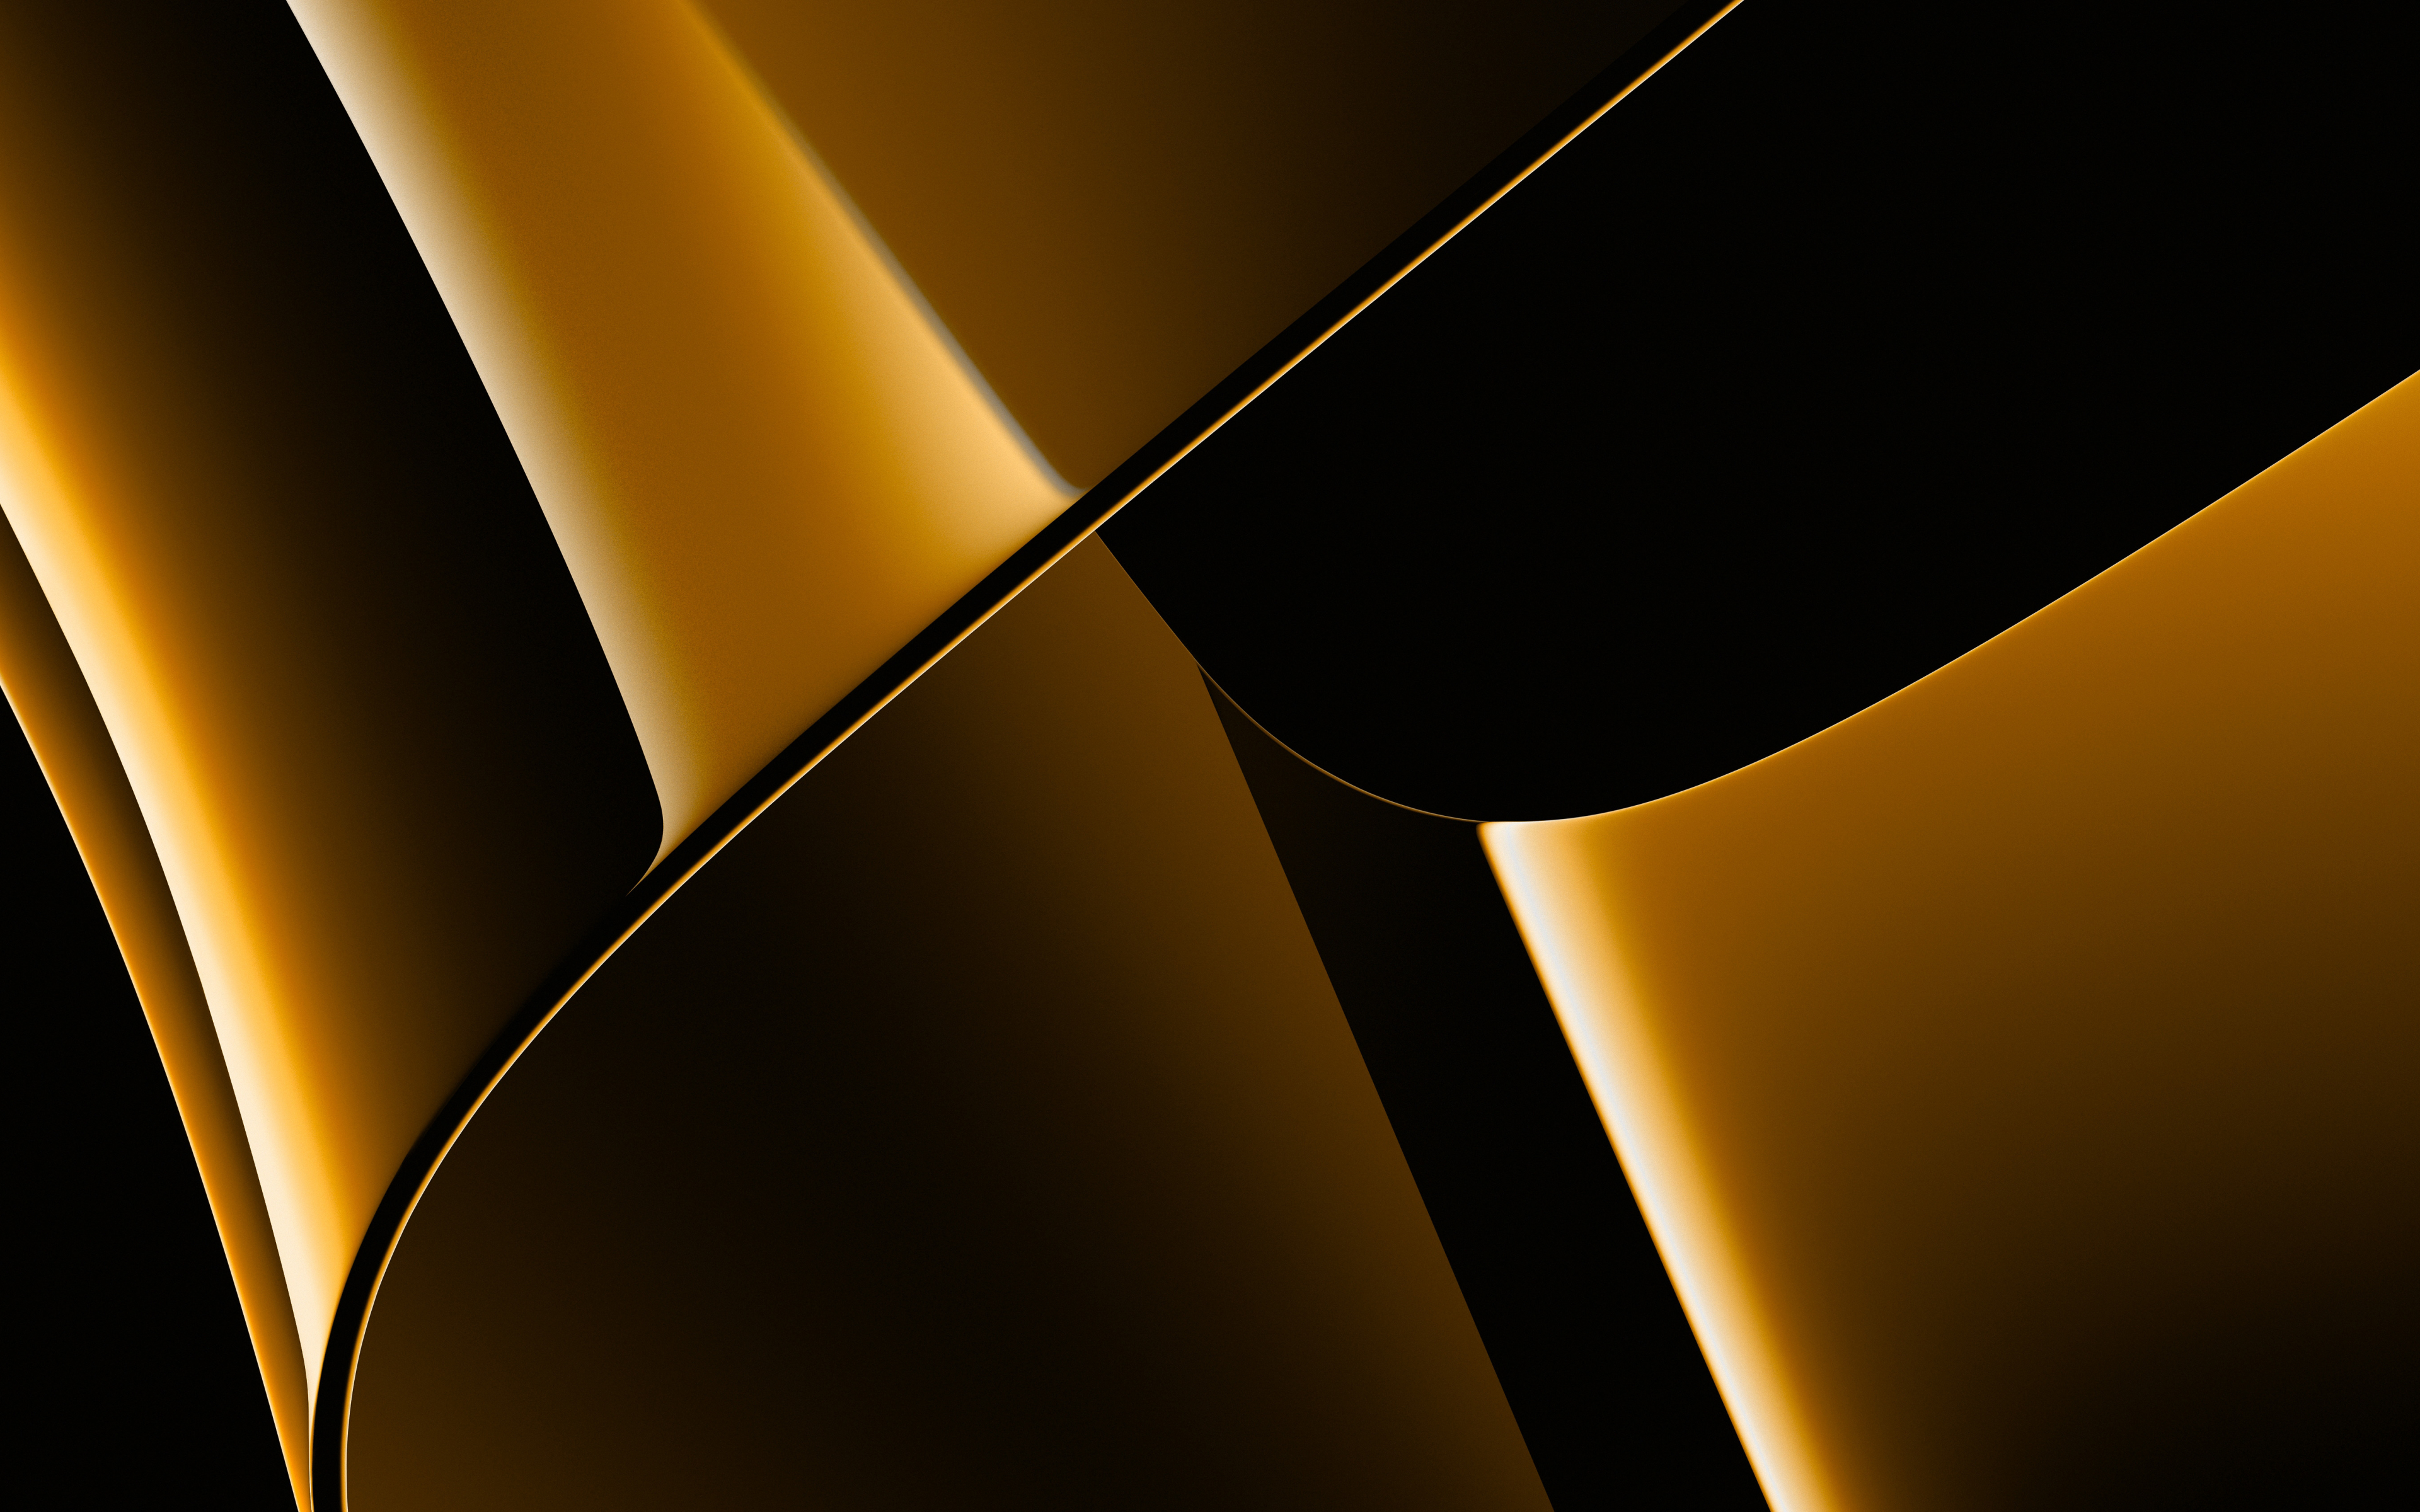 Golden surface, abstract, shapes, 3840x2400 wallpaper